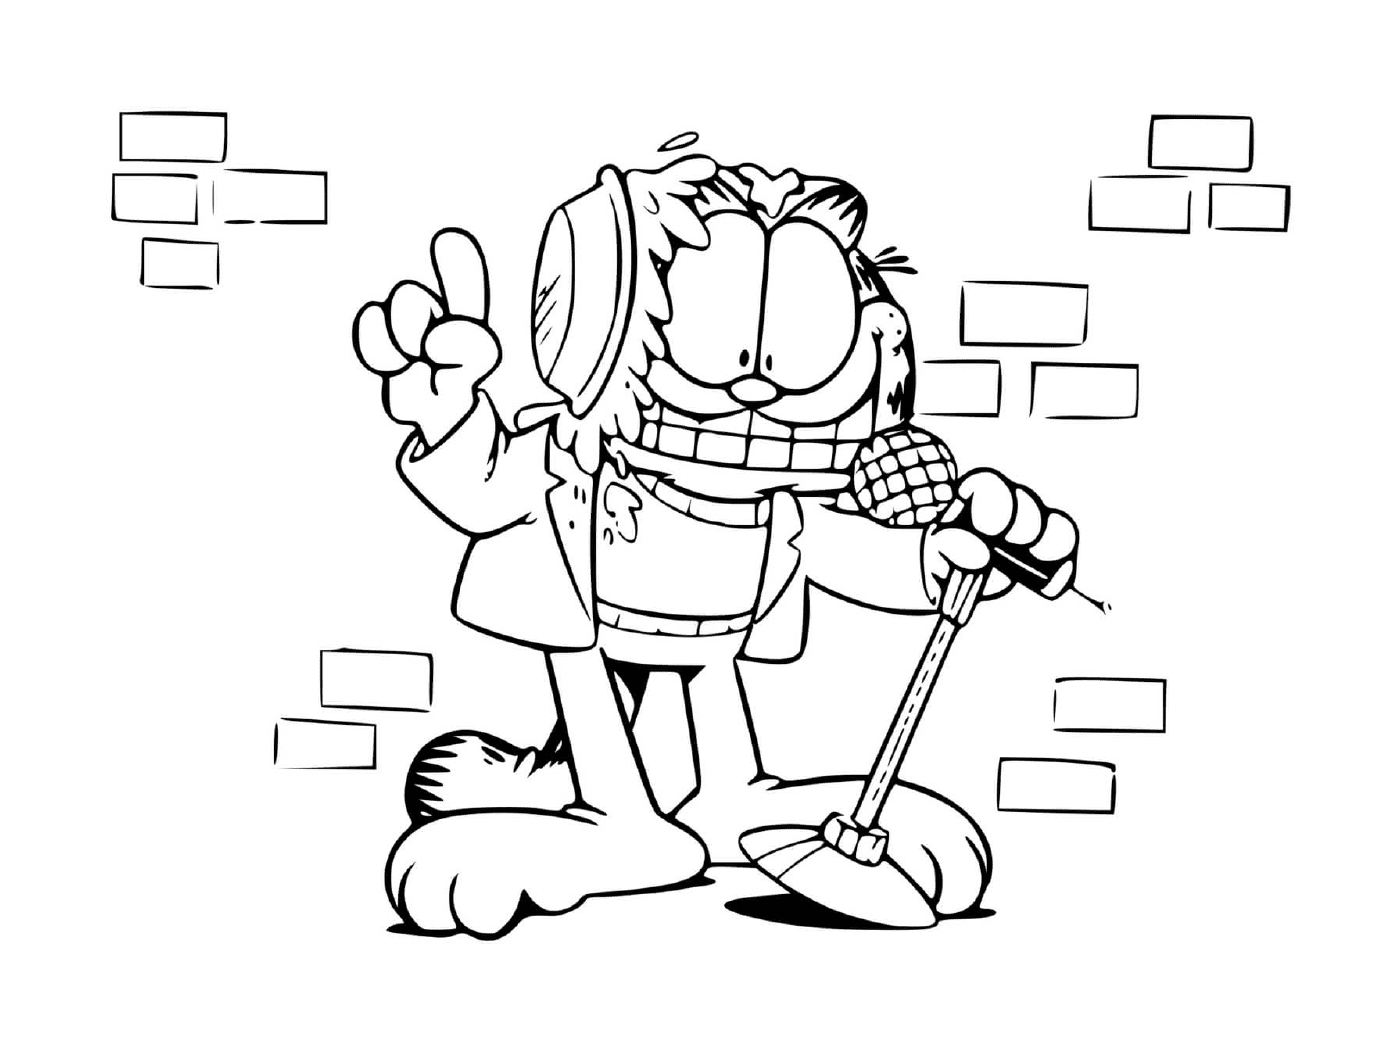  Garfield at the Comedy Club for Laughing 